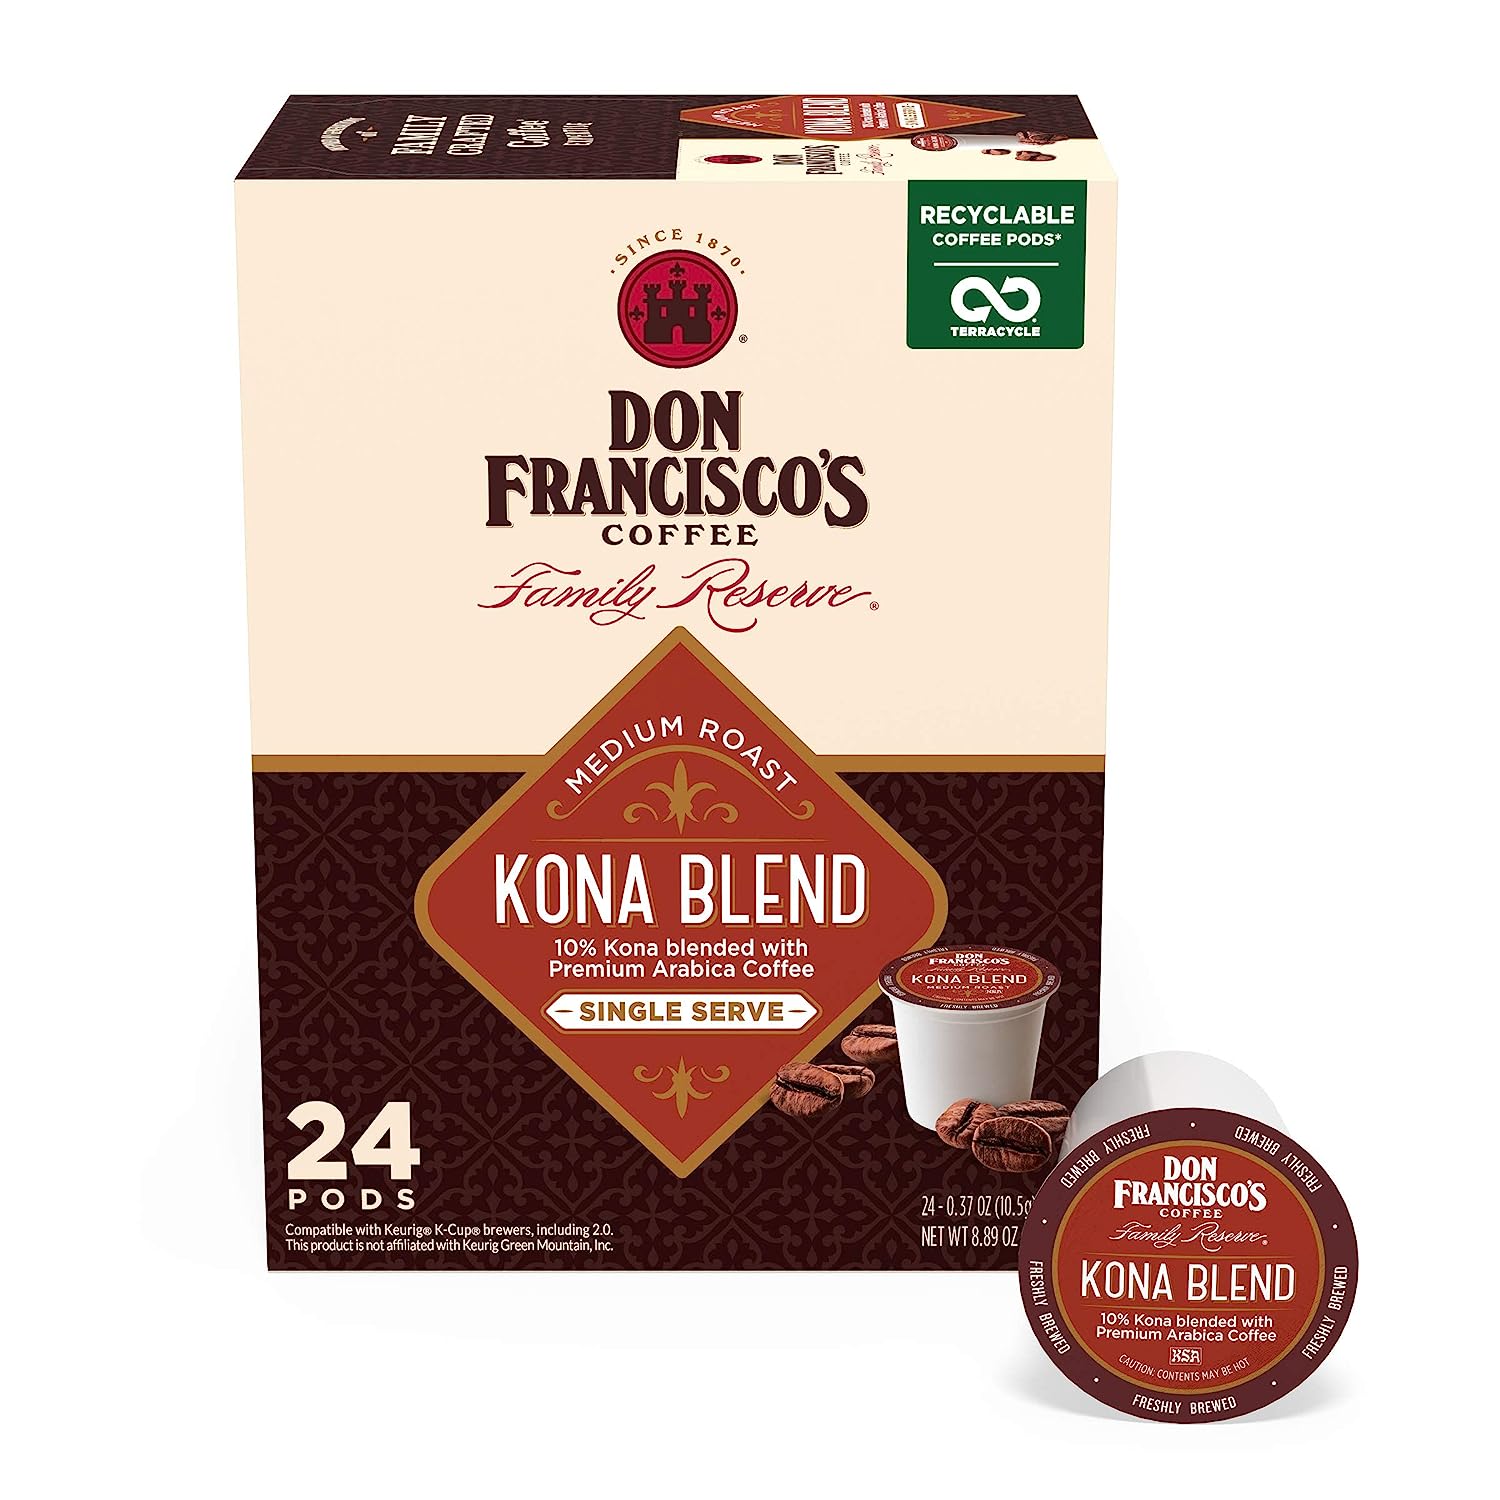 Don Francisco's Kona Blend Medium Roast Coffee Pods - 24 Count - Recyclable Single-Serve Coffee Pods, Compatible with your K- Cup Keurig Coffee Maker